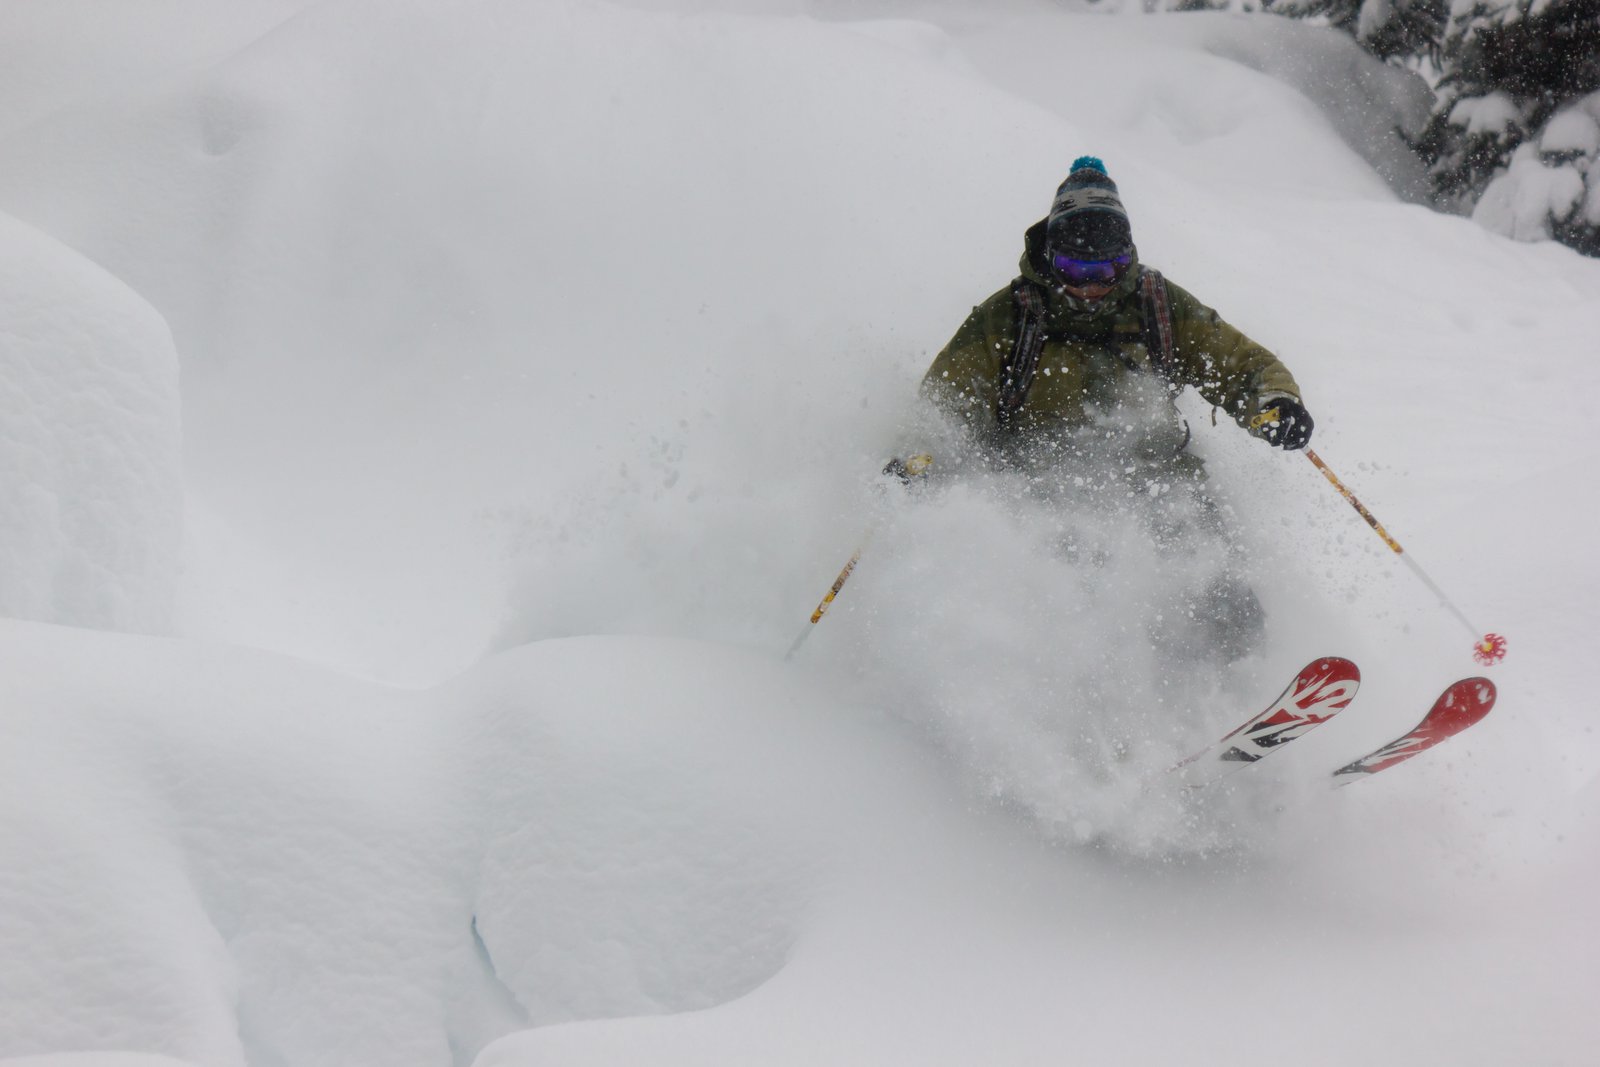 Already yearning for pow